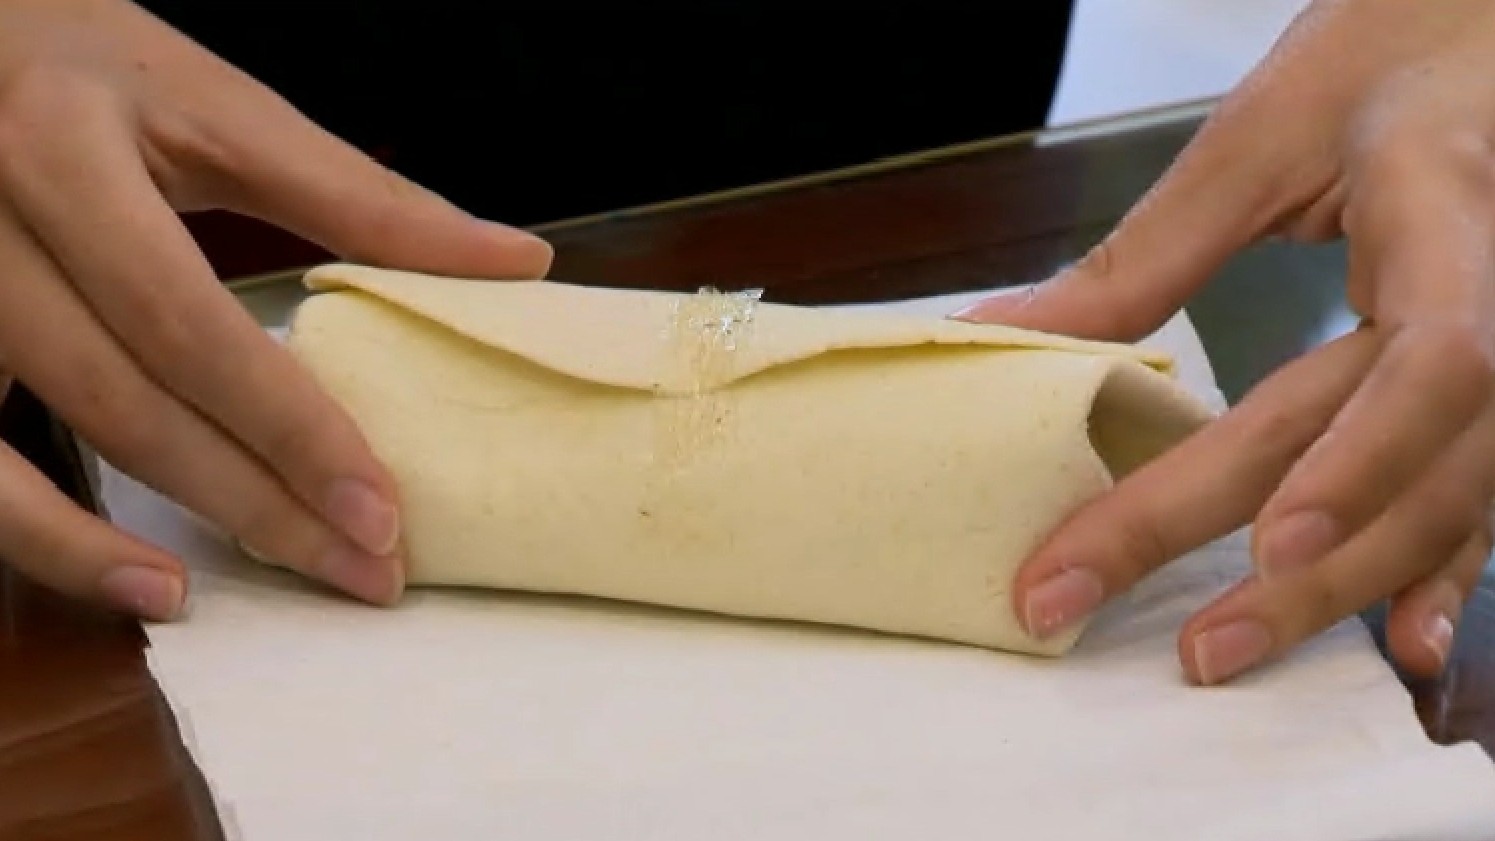 Engineering students create edible adhesive tape to keep your burrito  wrapped tightly - Boing Boing